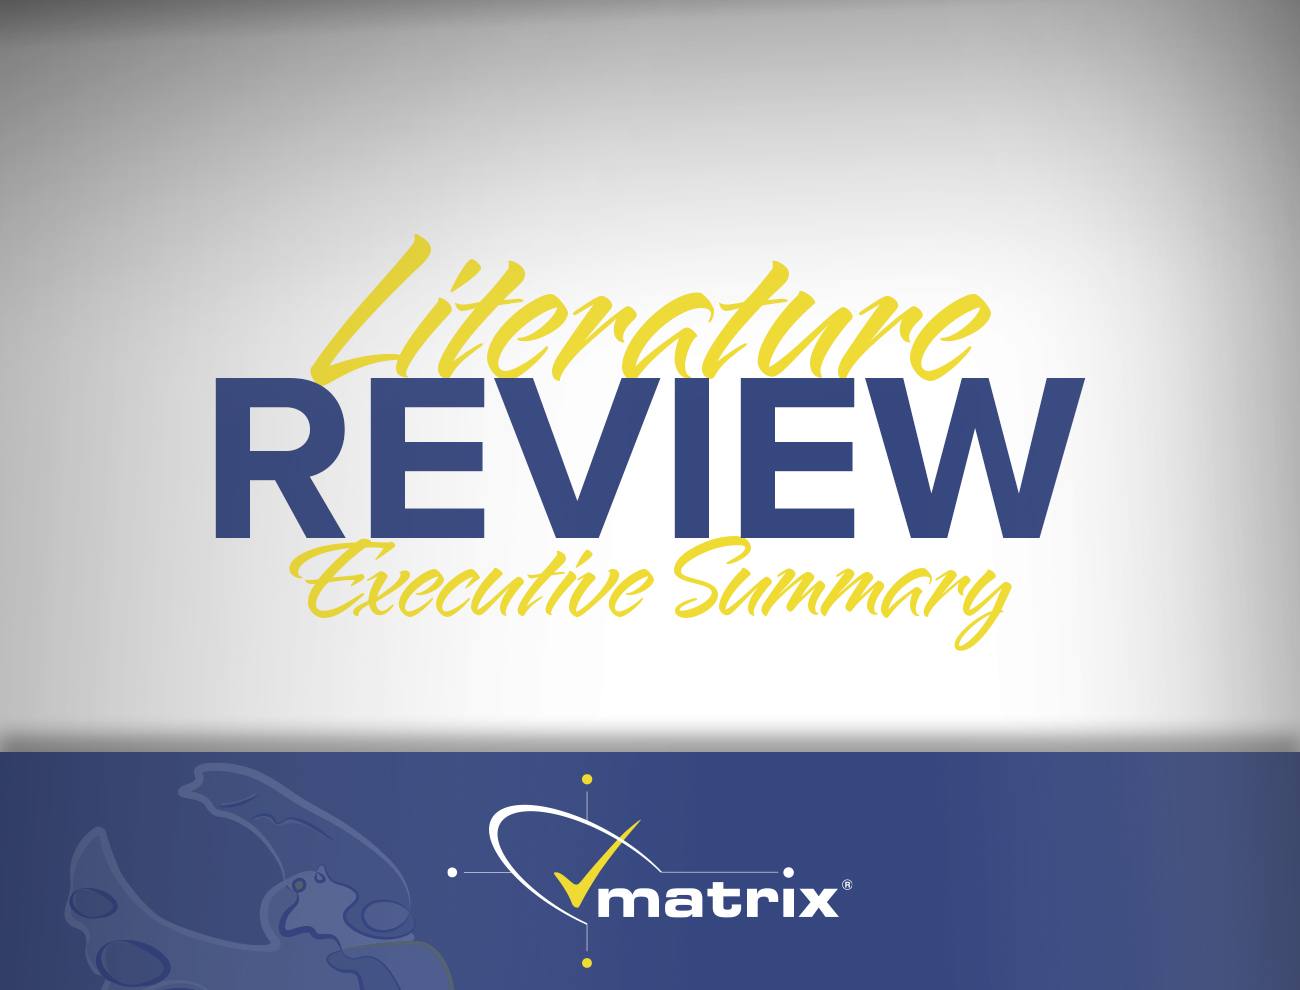 literature review executive summary